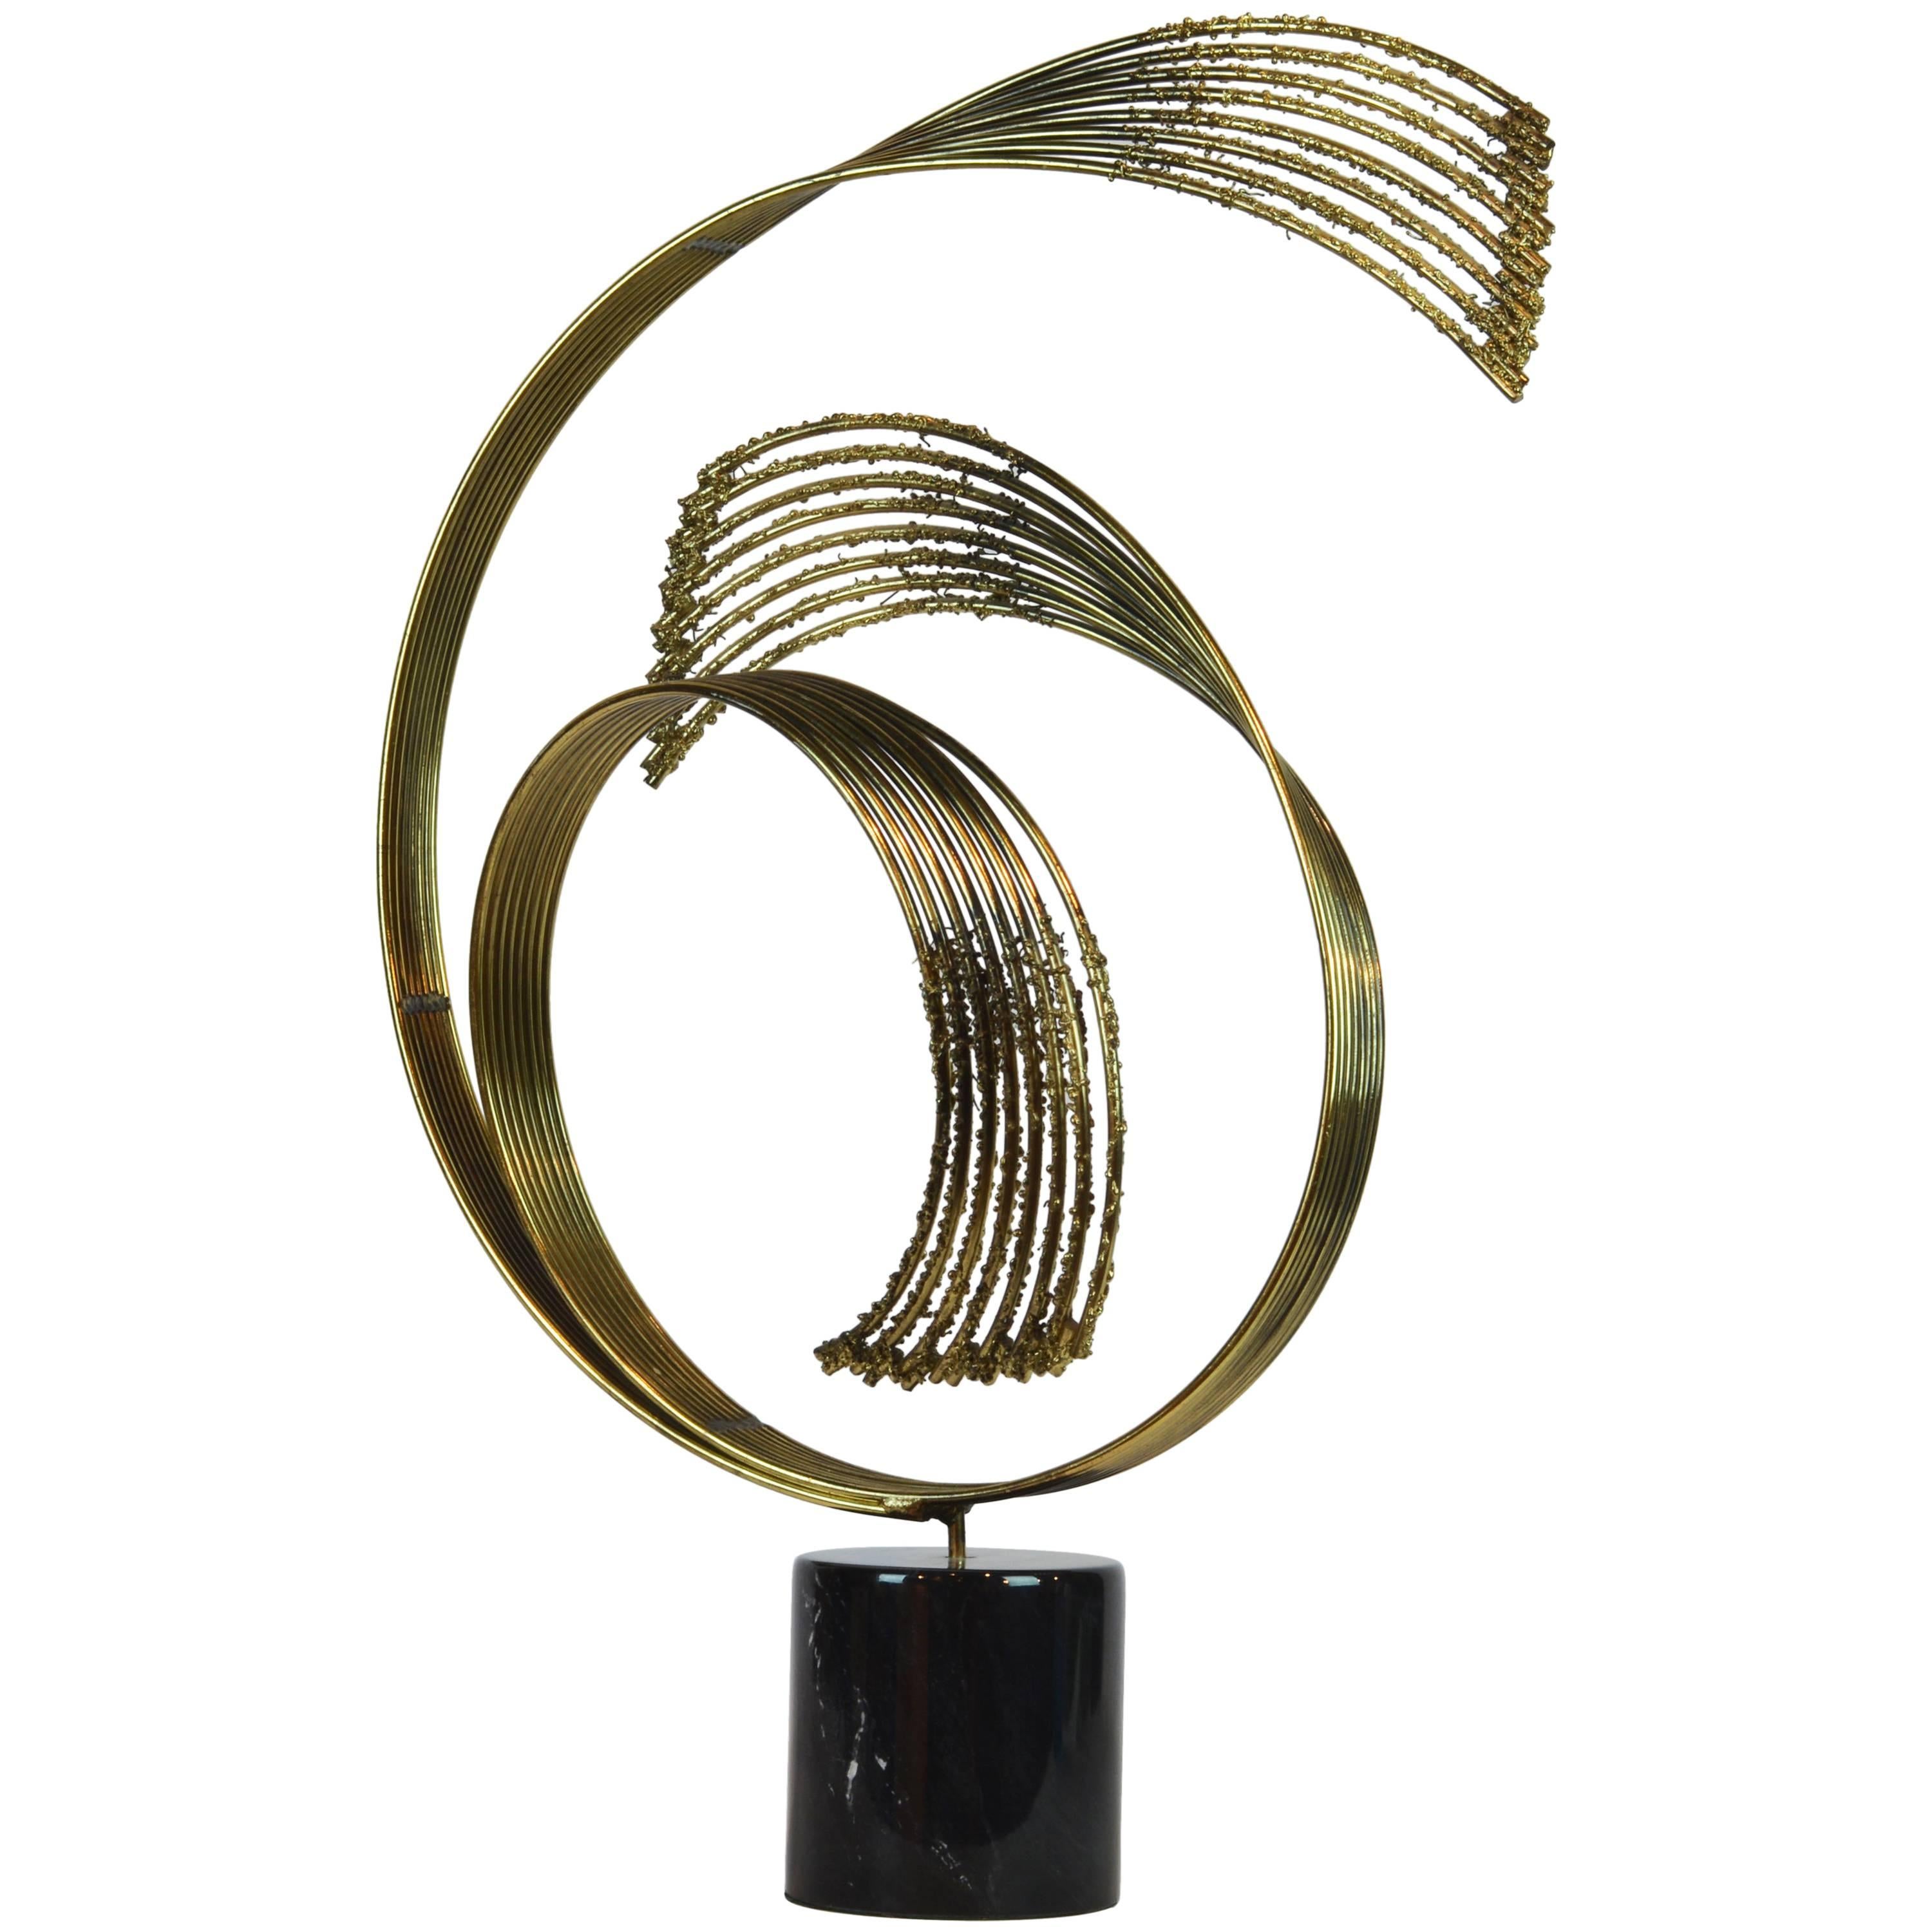 Stunning Midcentury Abstract Swirling Brass Sculpture Signed by Curtis Jere